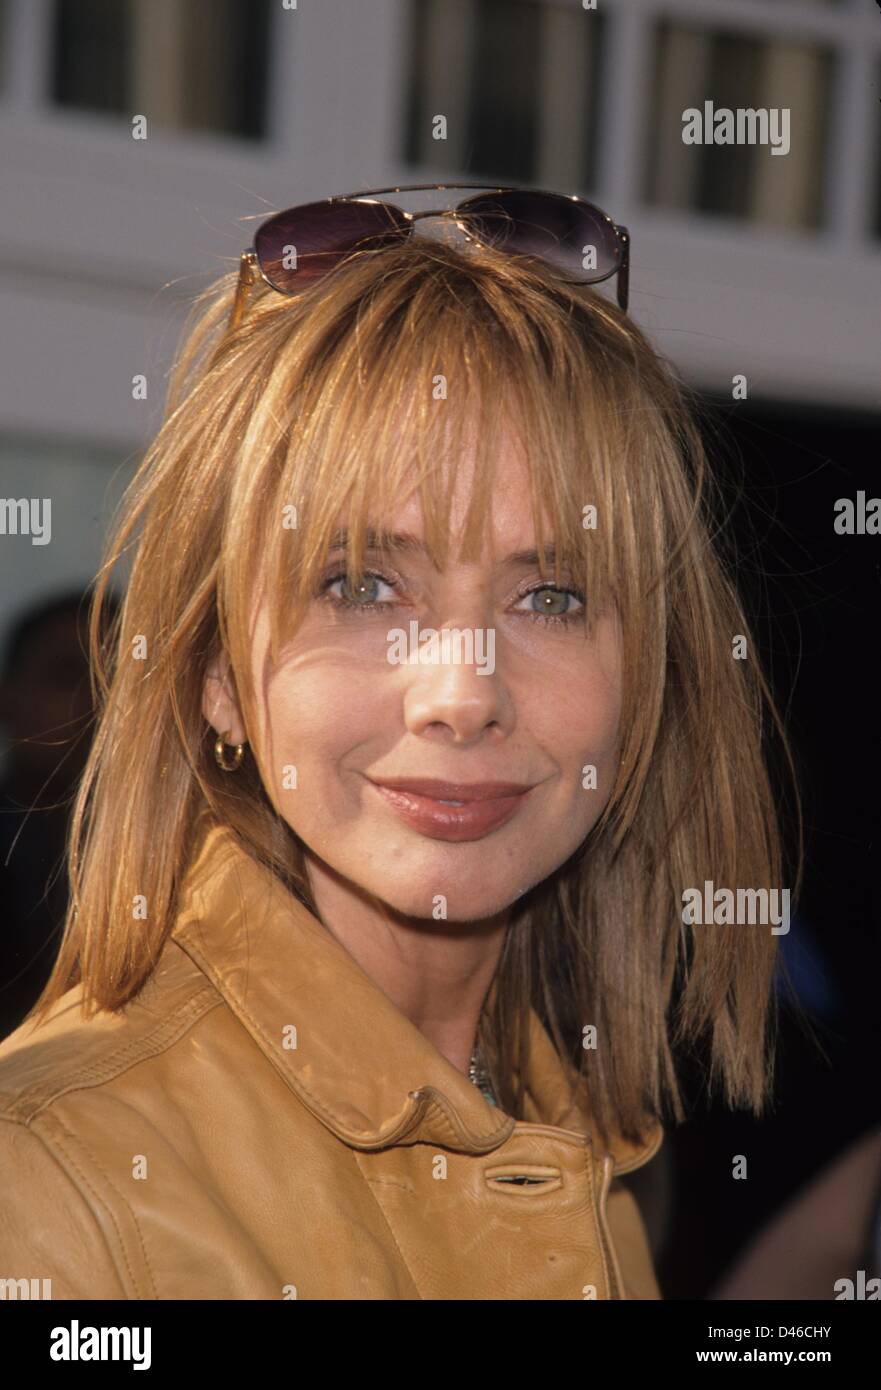 ROSANNA ARQUETTE.Independent film channel hosts party for Boys don't cry at Pedals cafe , Ca. 2000.k18356ar.(Credit Image: © Andrea Renault/Globe Photos/ZUMAPRESS.com) Stock Photo